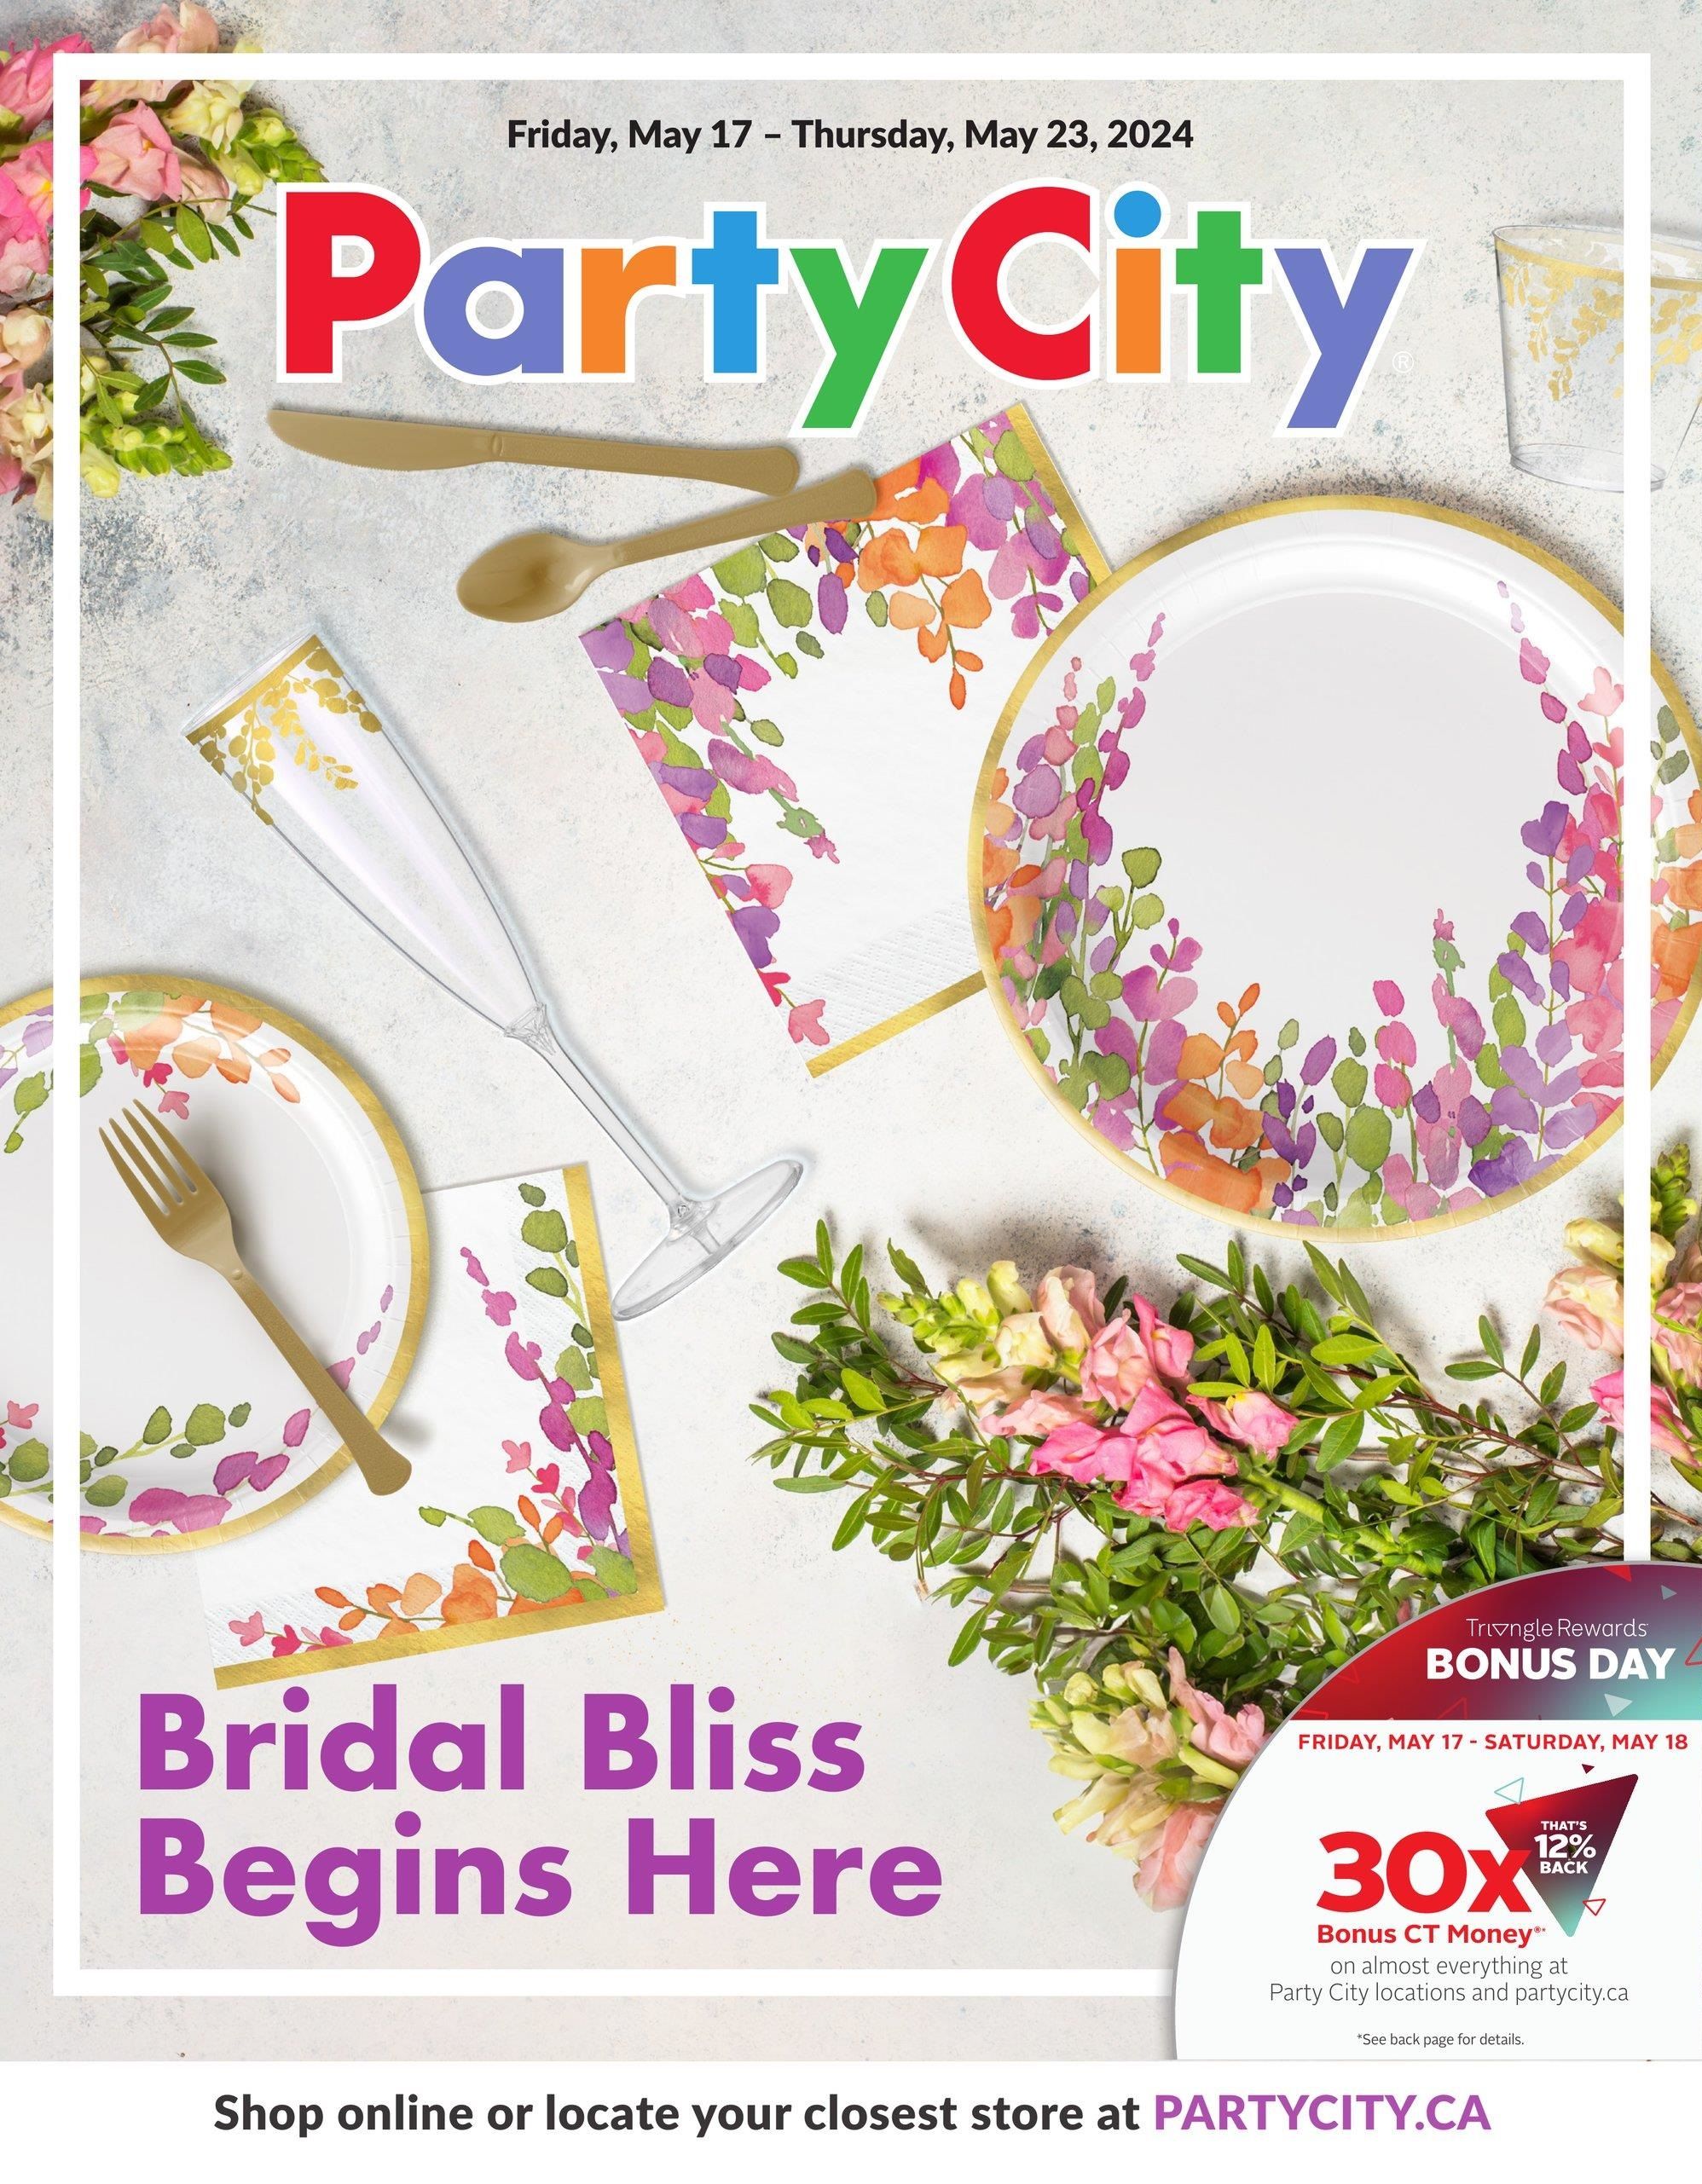 Party City - Bridal Bliss